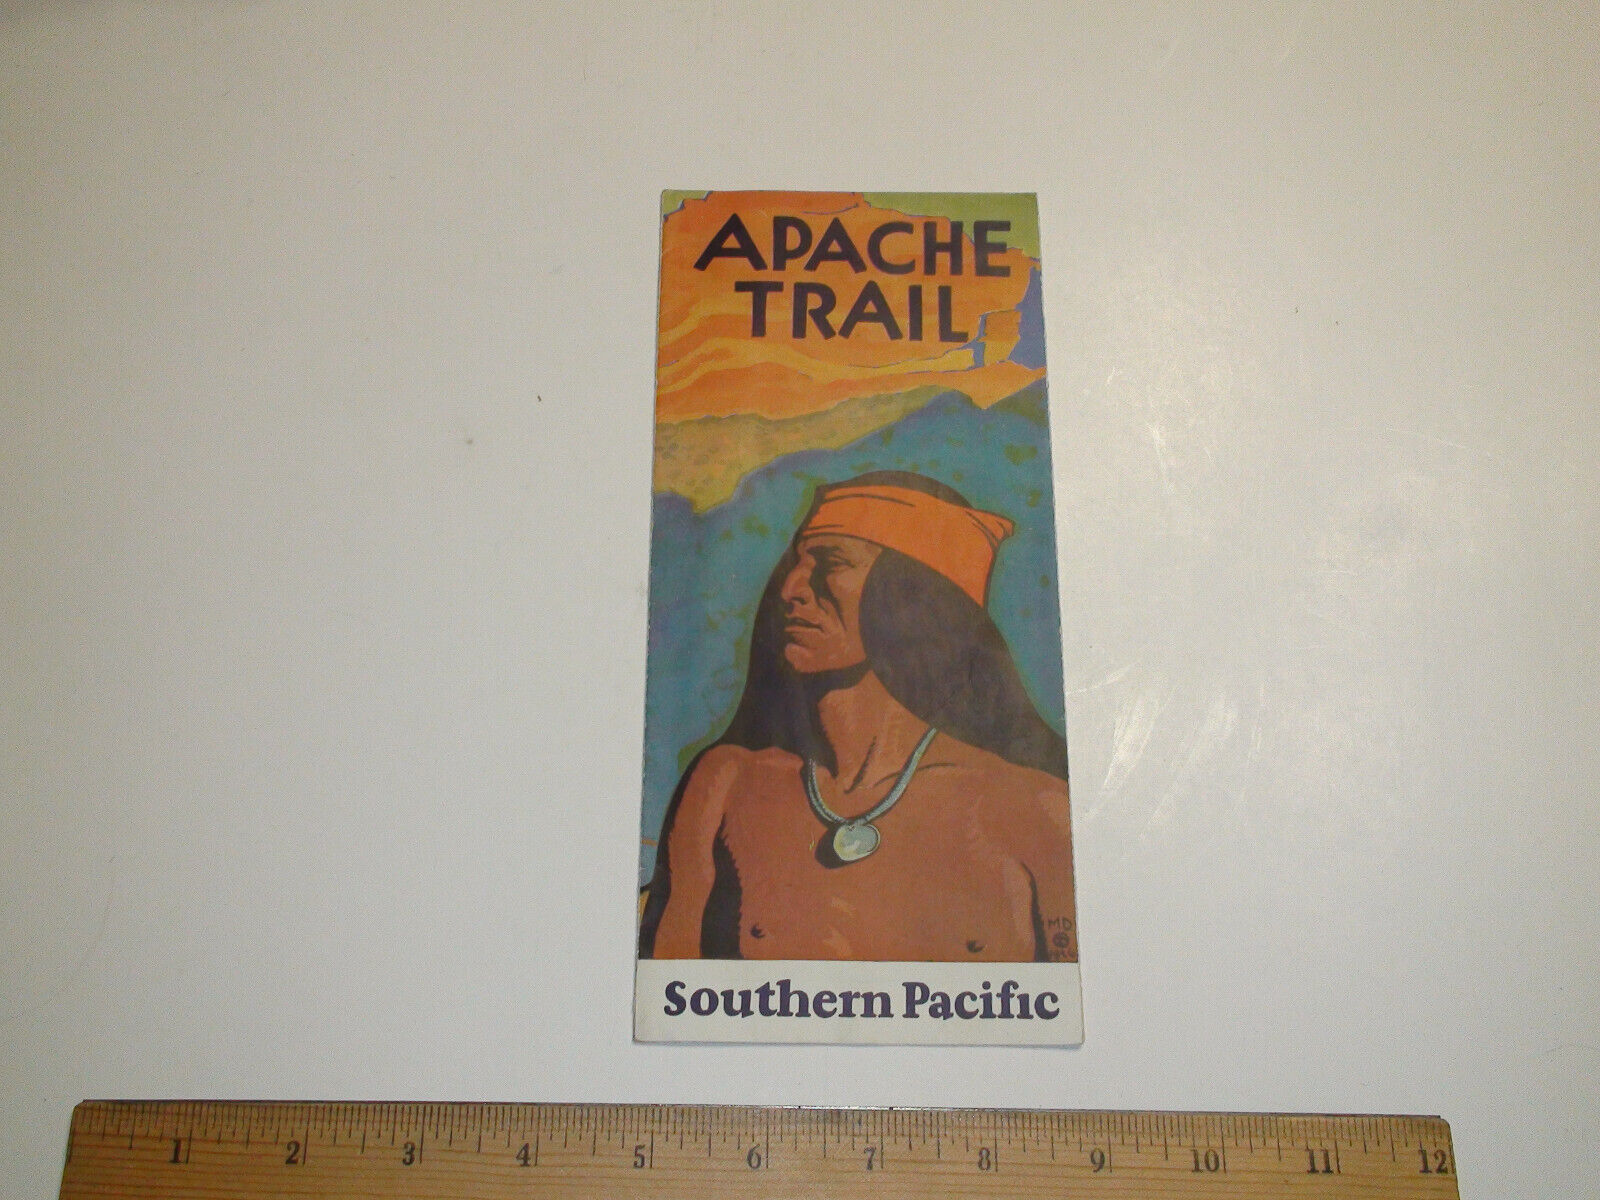 1930 Southern Pacific Apache Trail Travel Brochure - 9/10/30